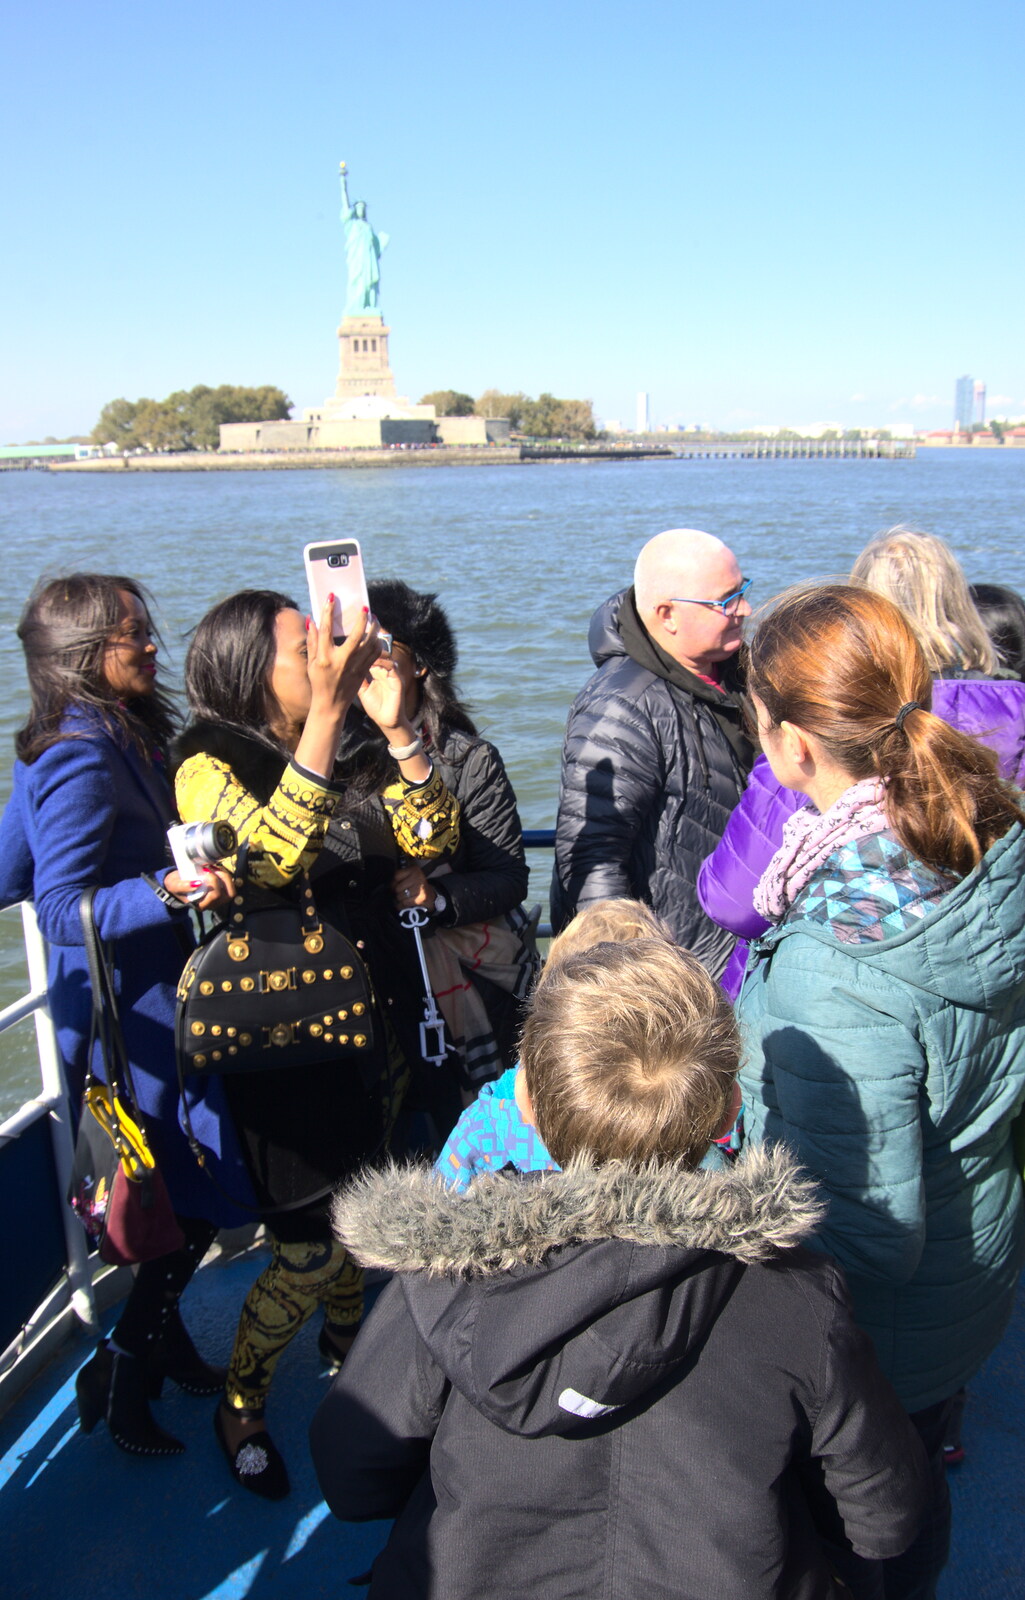 Selfies are taken from The Liberty Cruise and One World Trade Center, New York, United States - 23rd October 2018